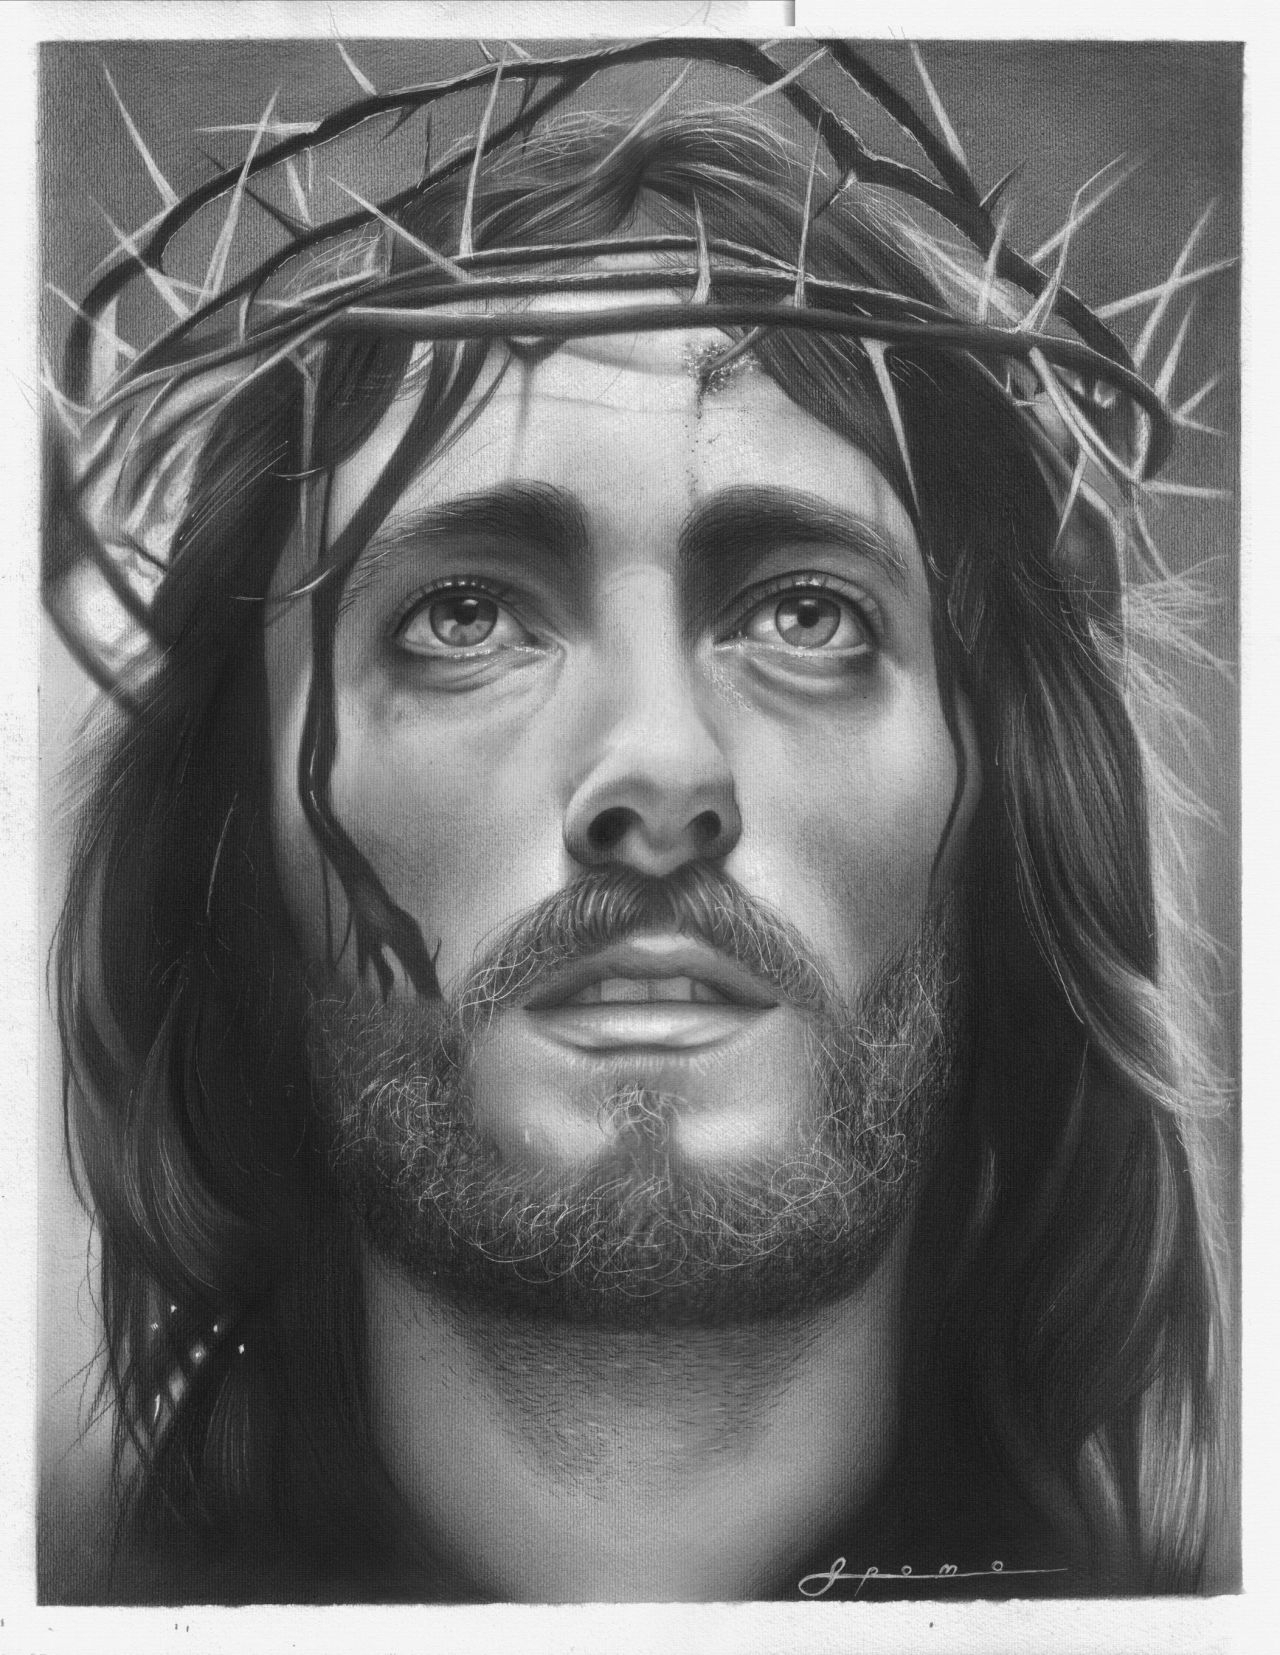 Animal Jesus Christ Sketches Drawings for Adult